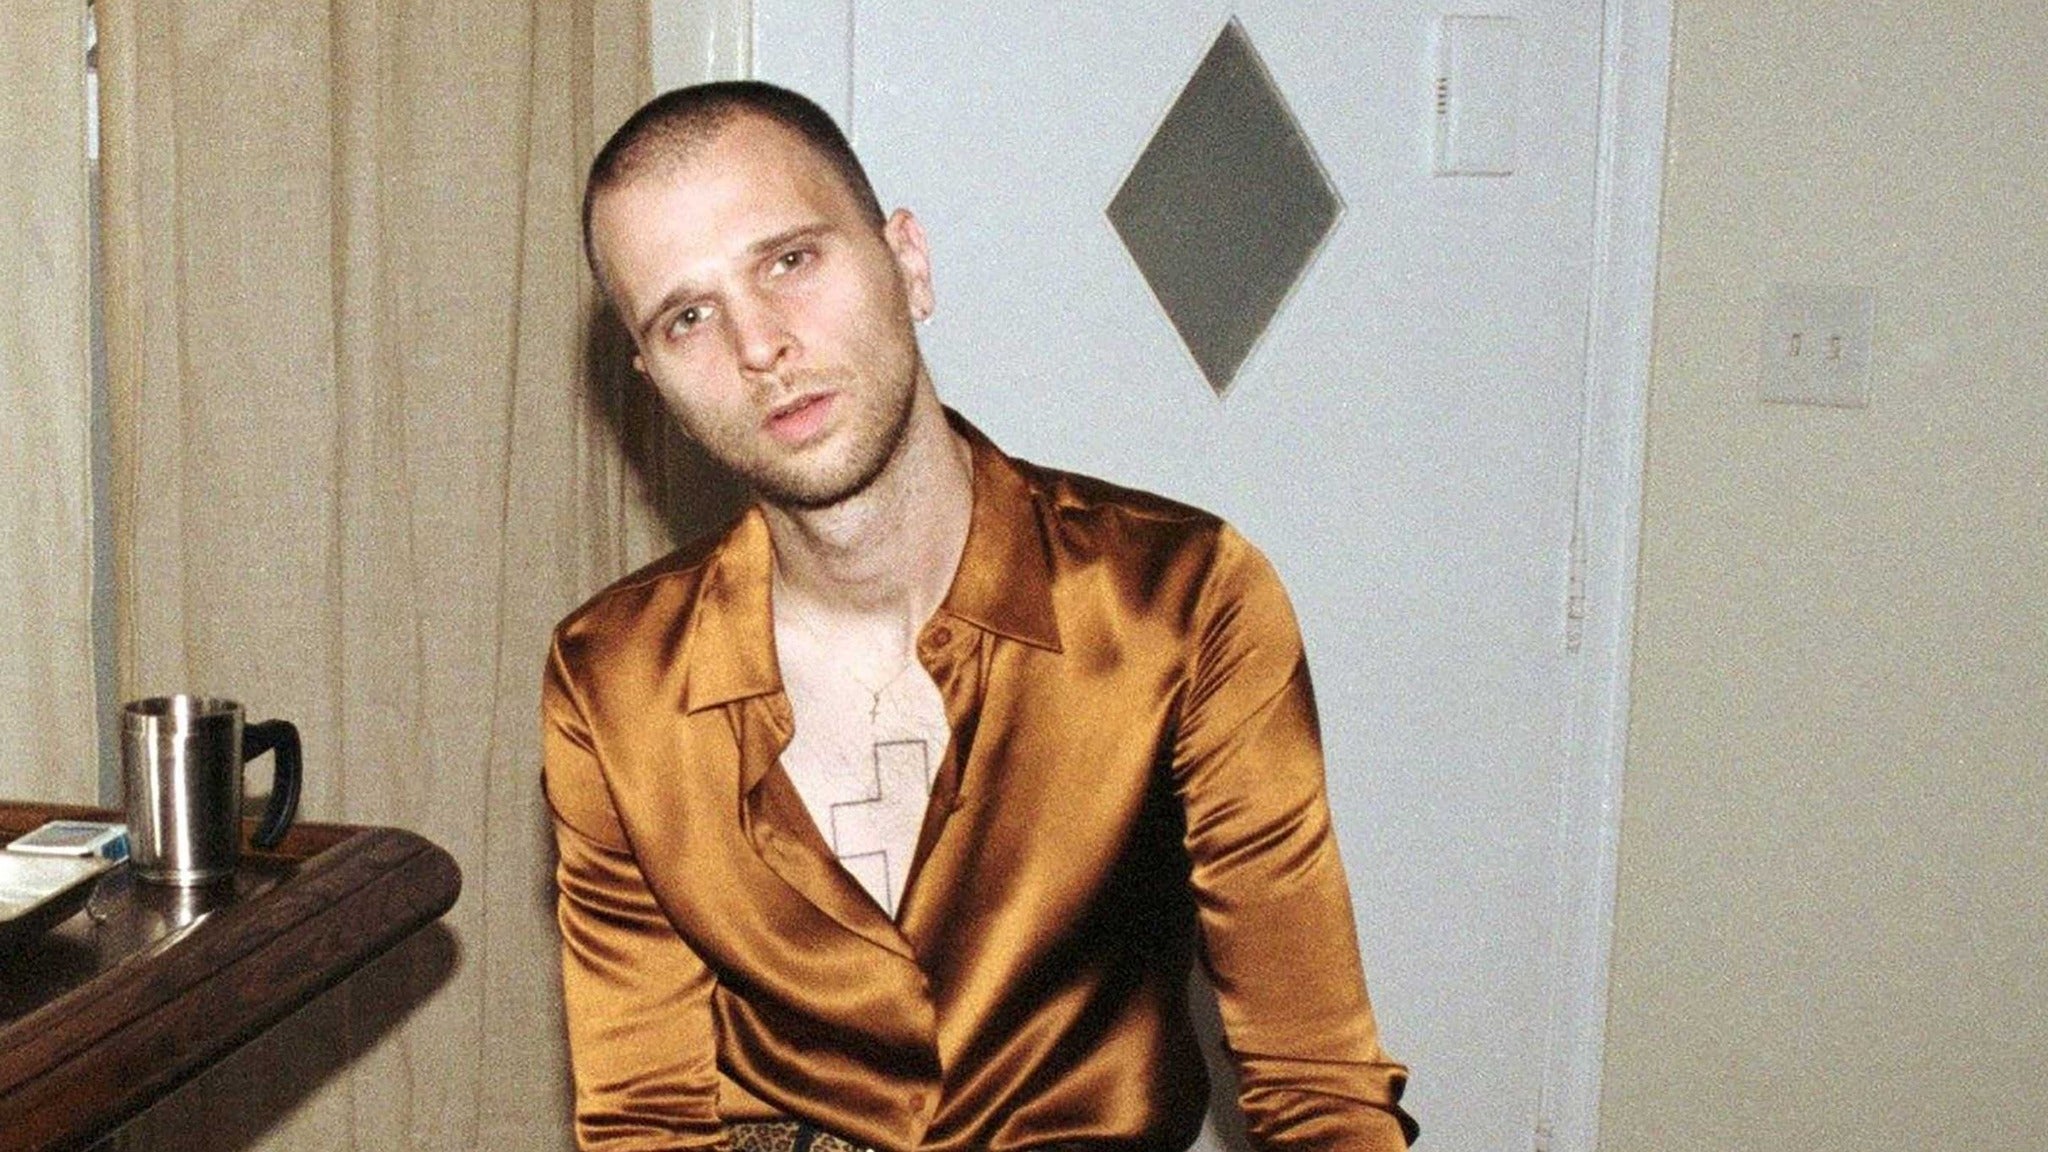 JMSN at Toad's Place